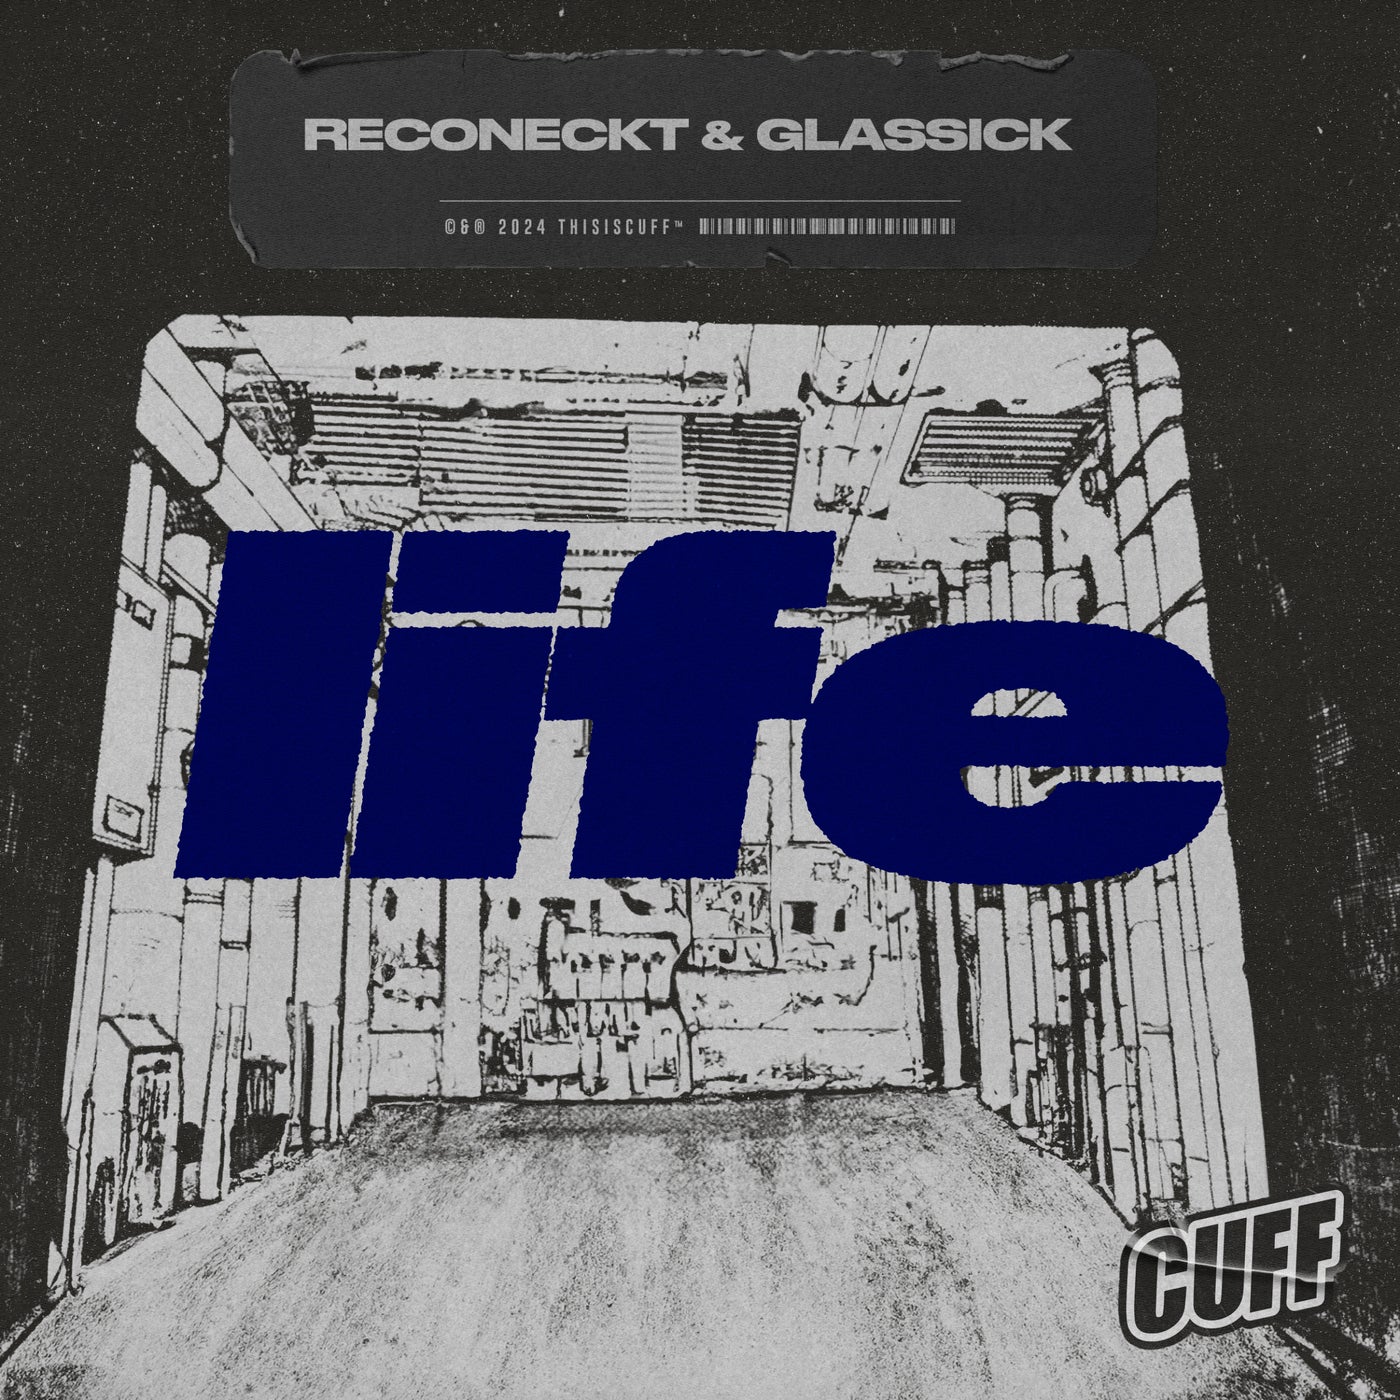 image cover: Glassick, Reconeckt - Life on CUFF